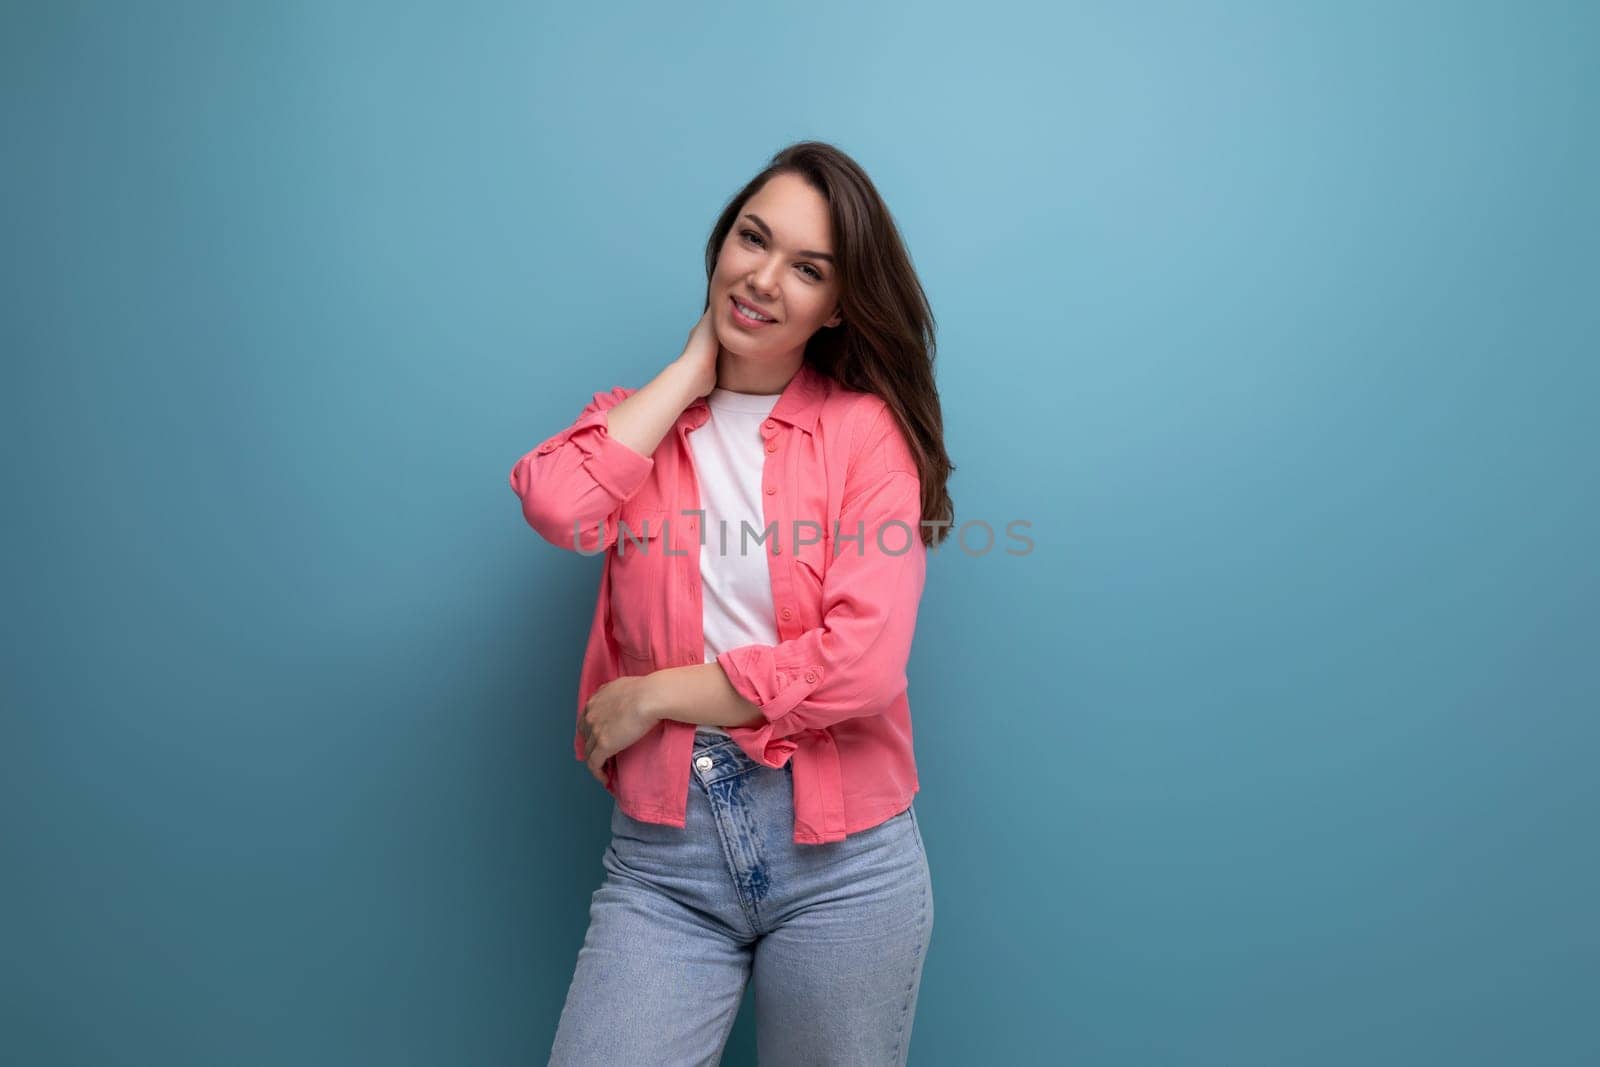 portrait of a woman with dark brown hair in jeans and a tank top with a shirt posing in the studio.